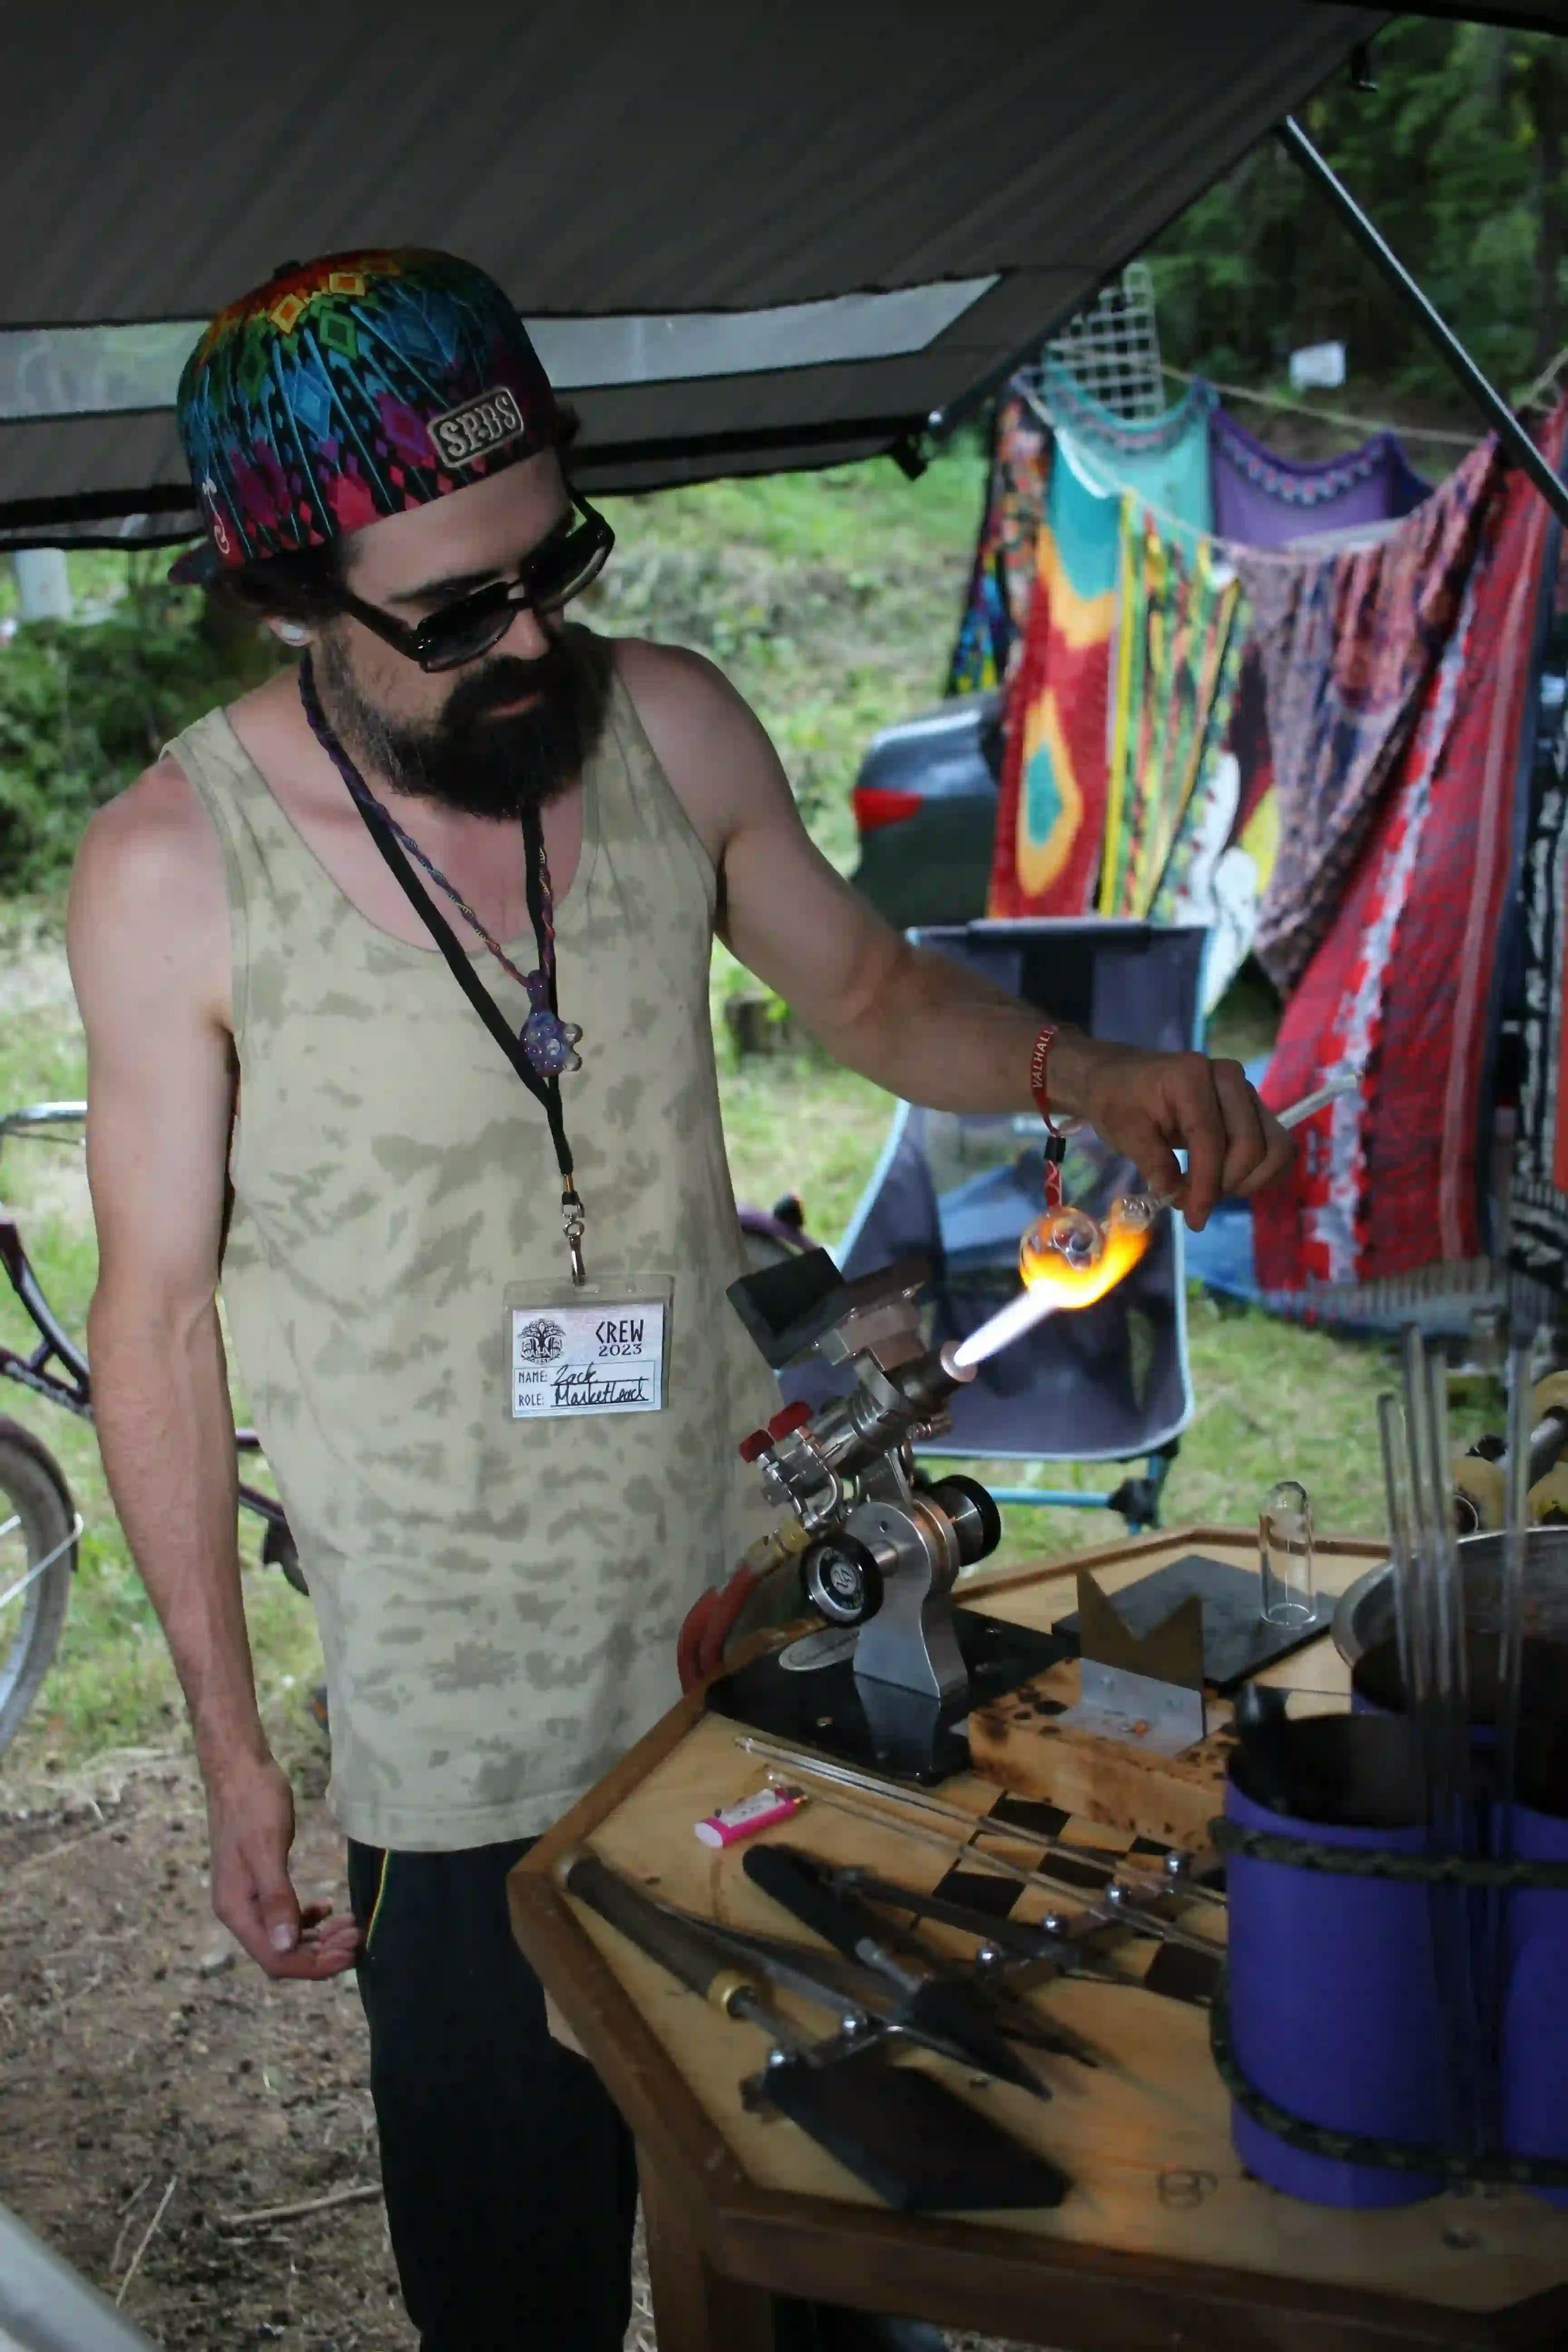 A man operating a glassblowing torch at a craft station with tools, wearing a colorful hat and a crew badge.